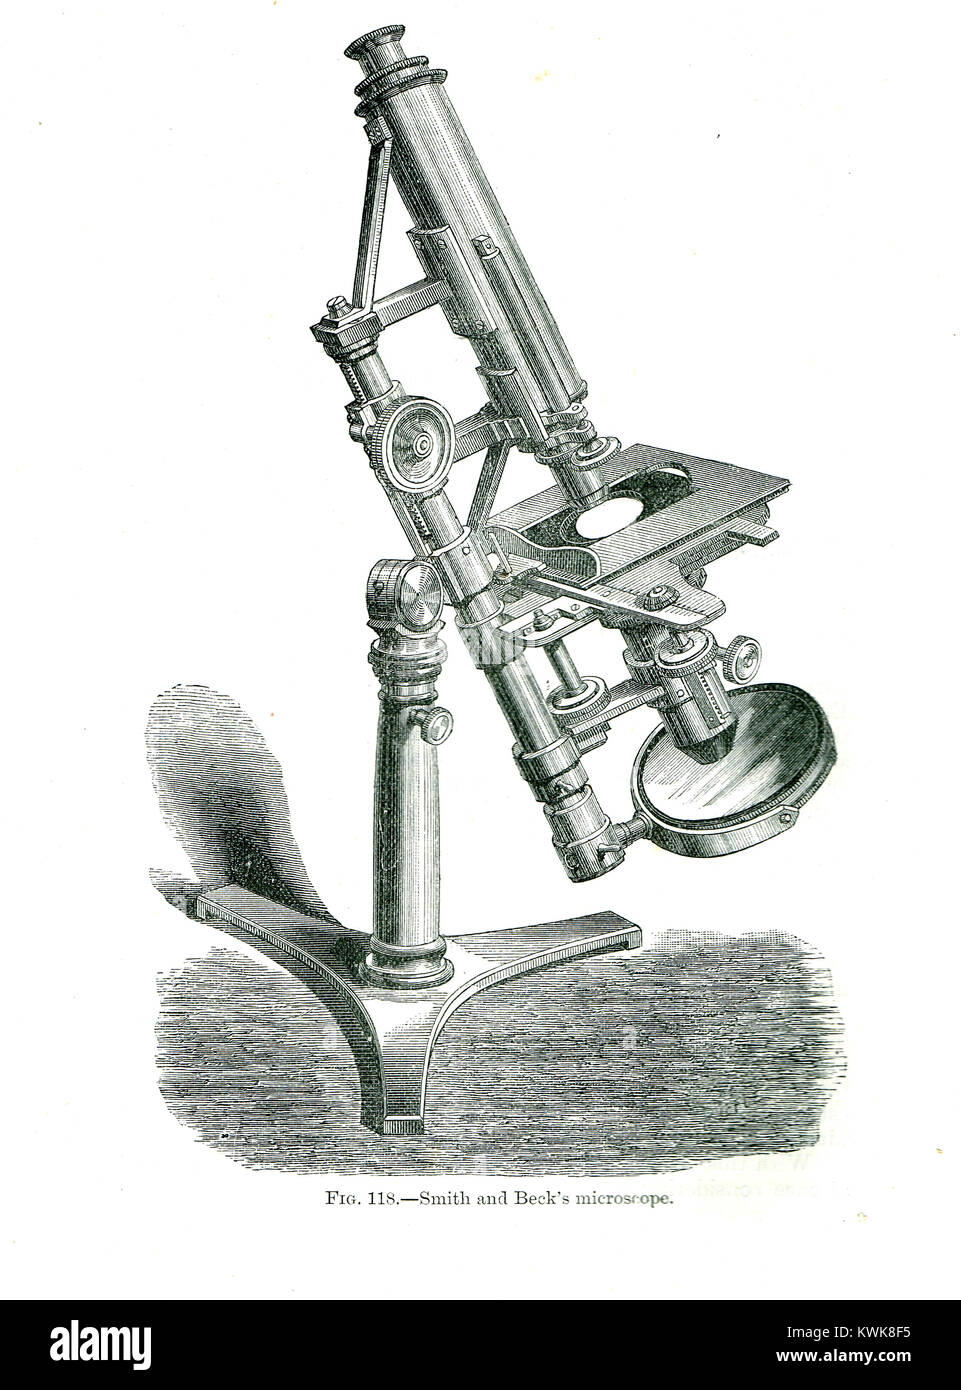 Smith & Beck microscope, vers 1850 Banque D'Images